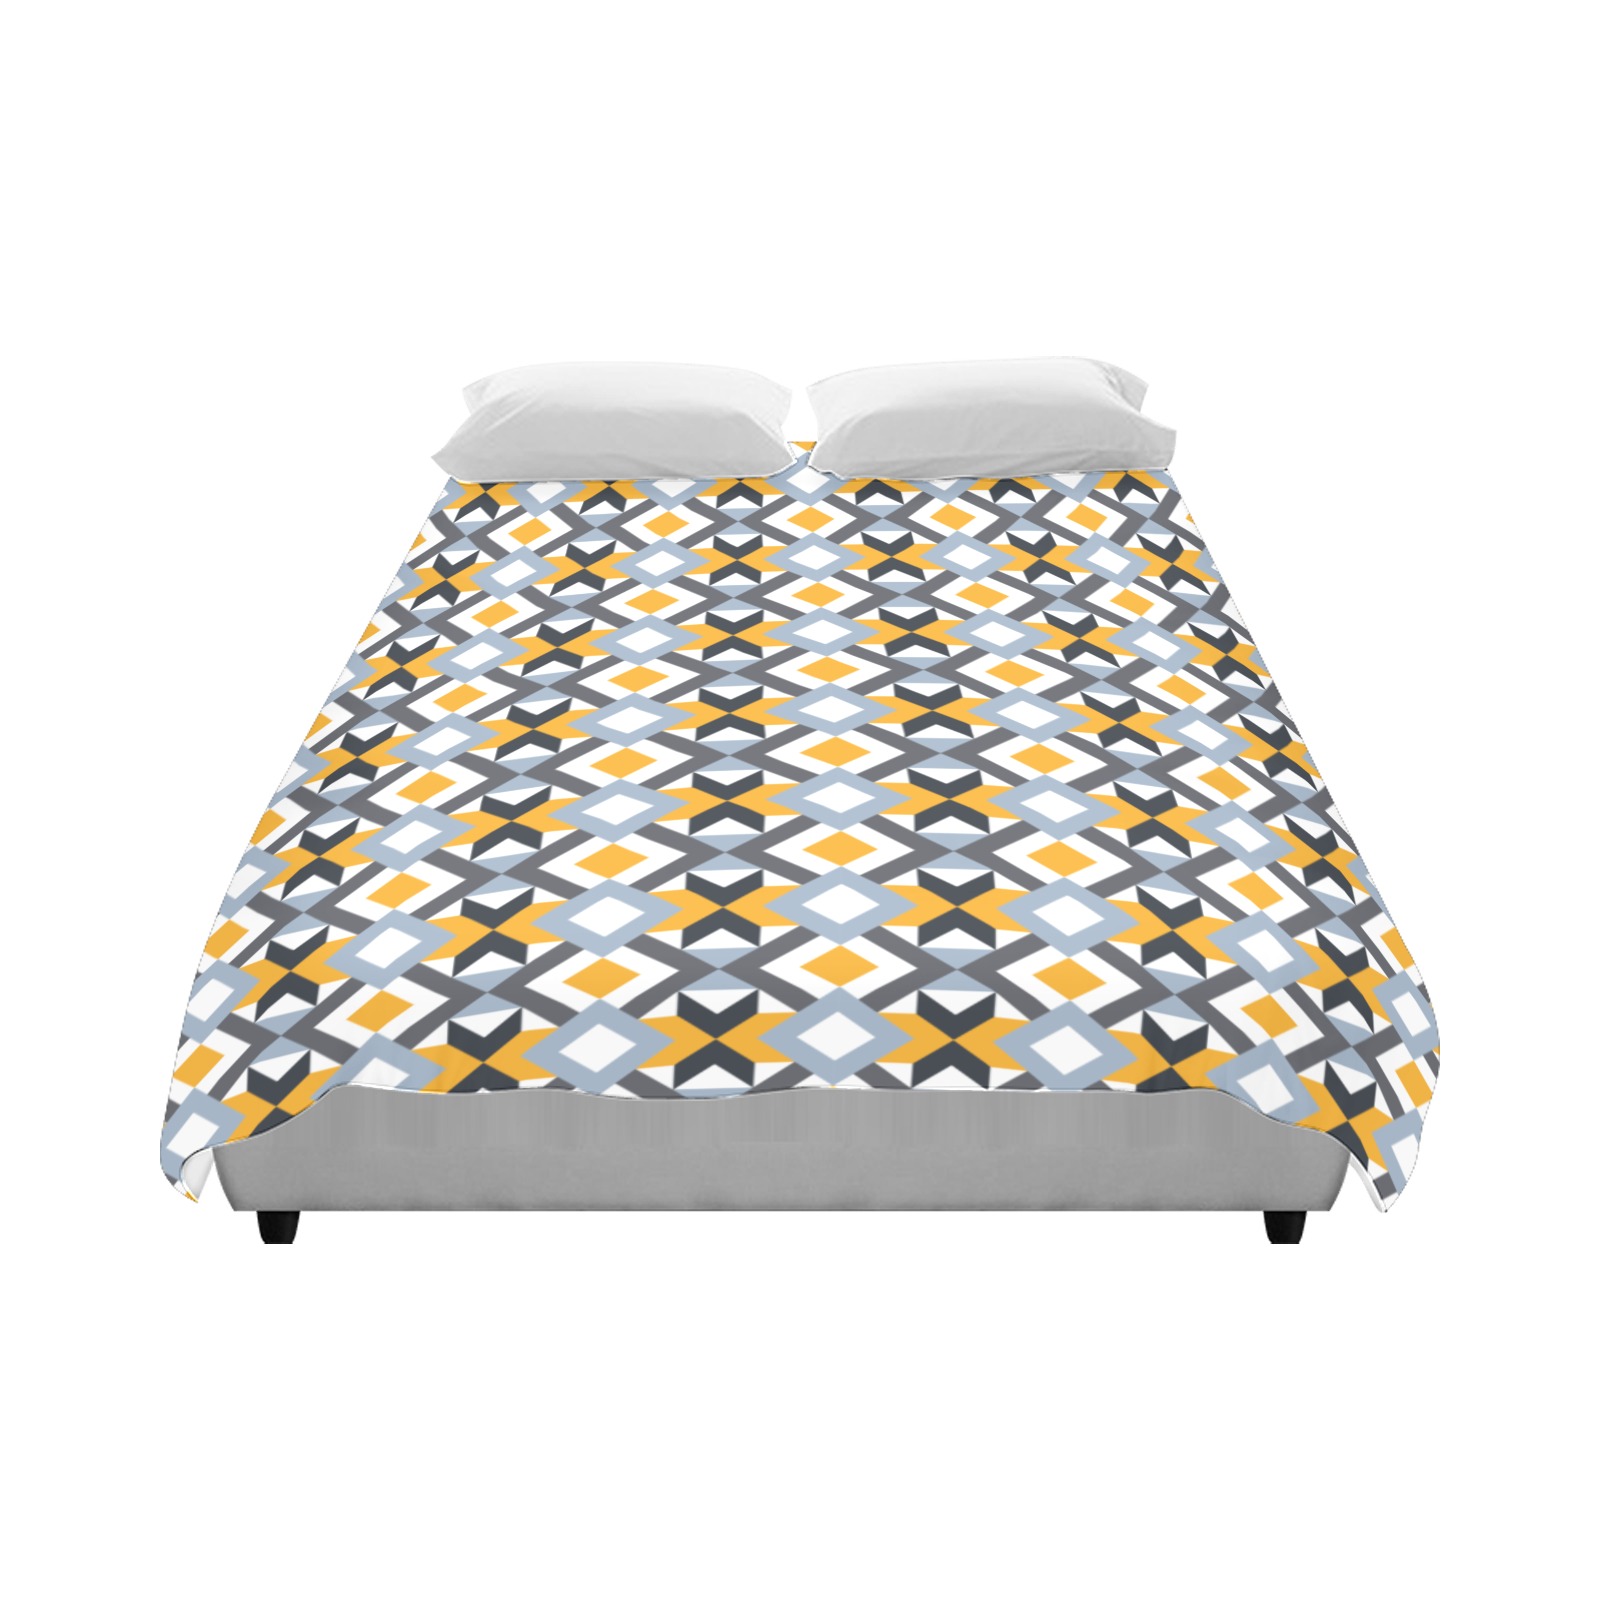 Retro Angles Abstract Geometric Pattern Duvet Cover 86"x70" ( All-over-print)